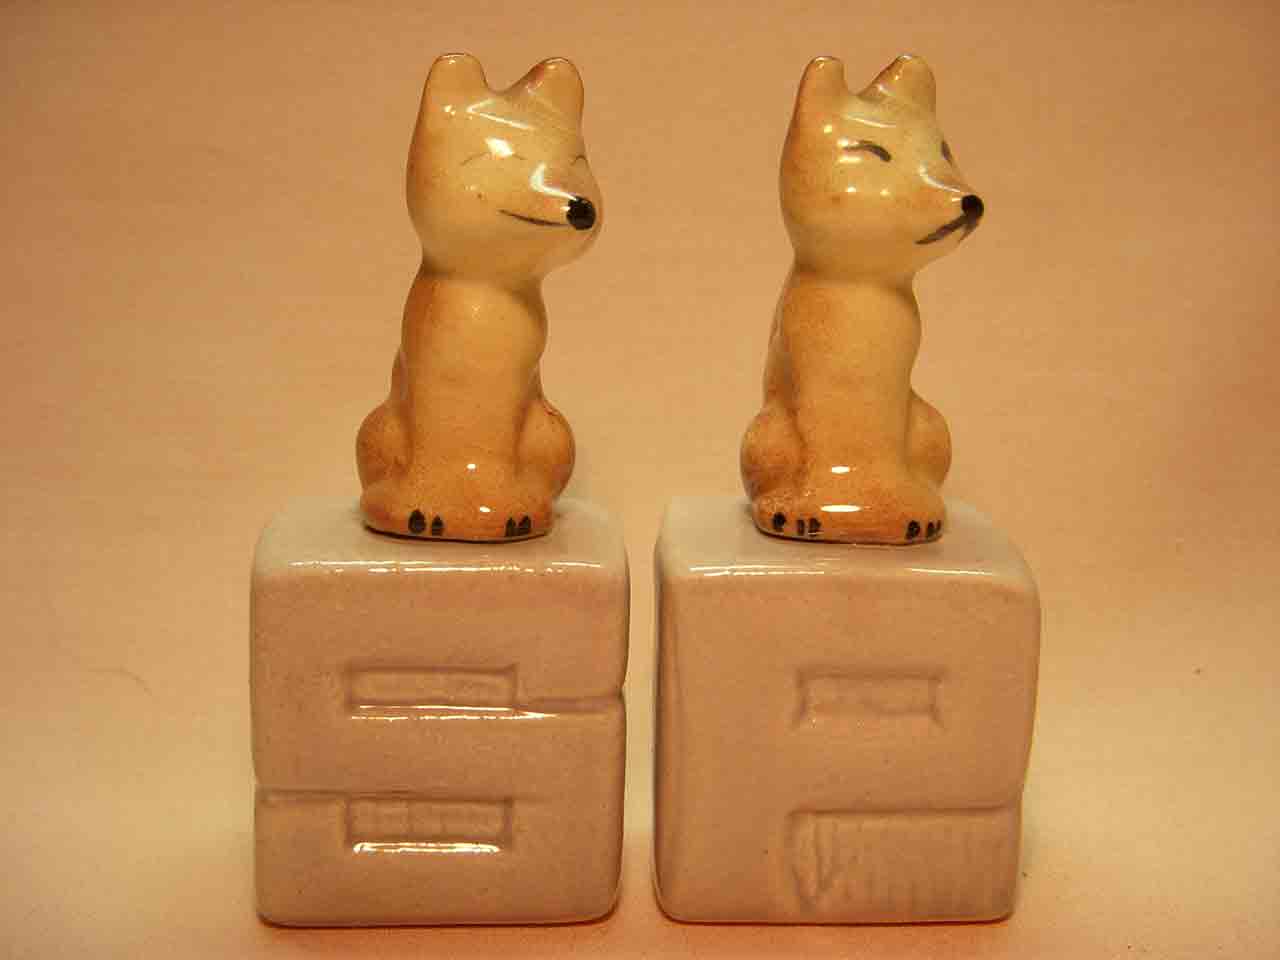 Animals on S&P letters salt and pepper shakers - Foxes